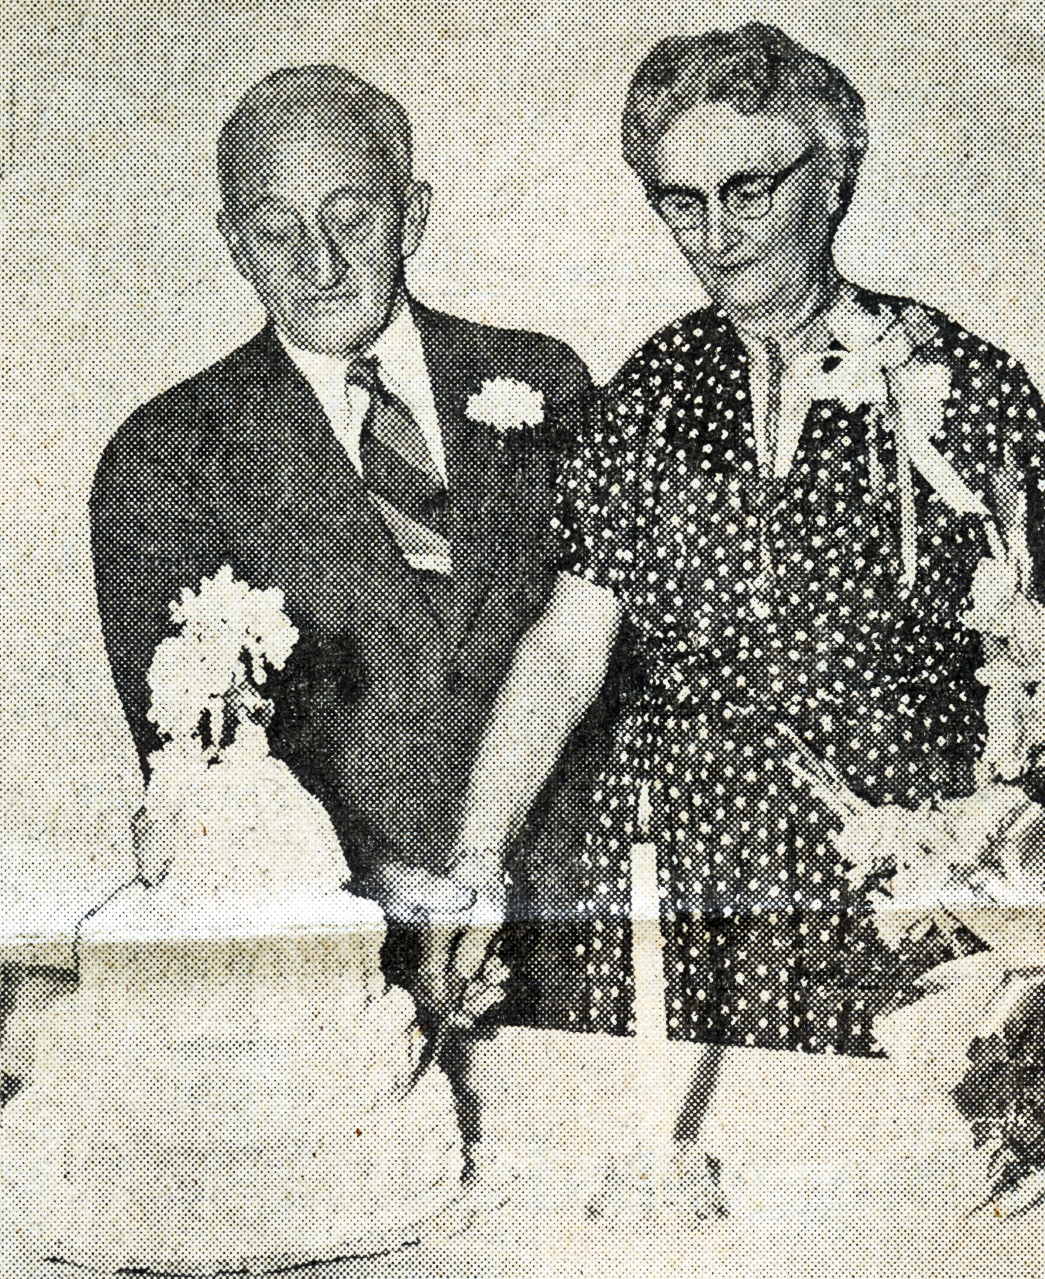 Local History Notes: Marriages (August 25)